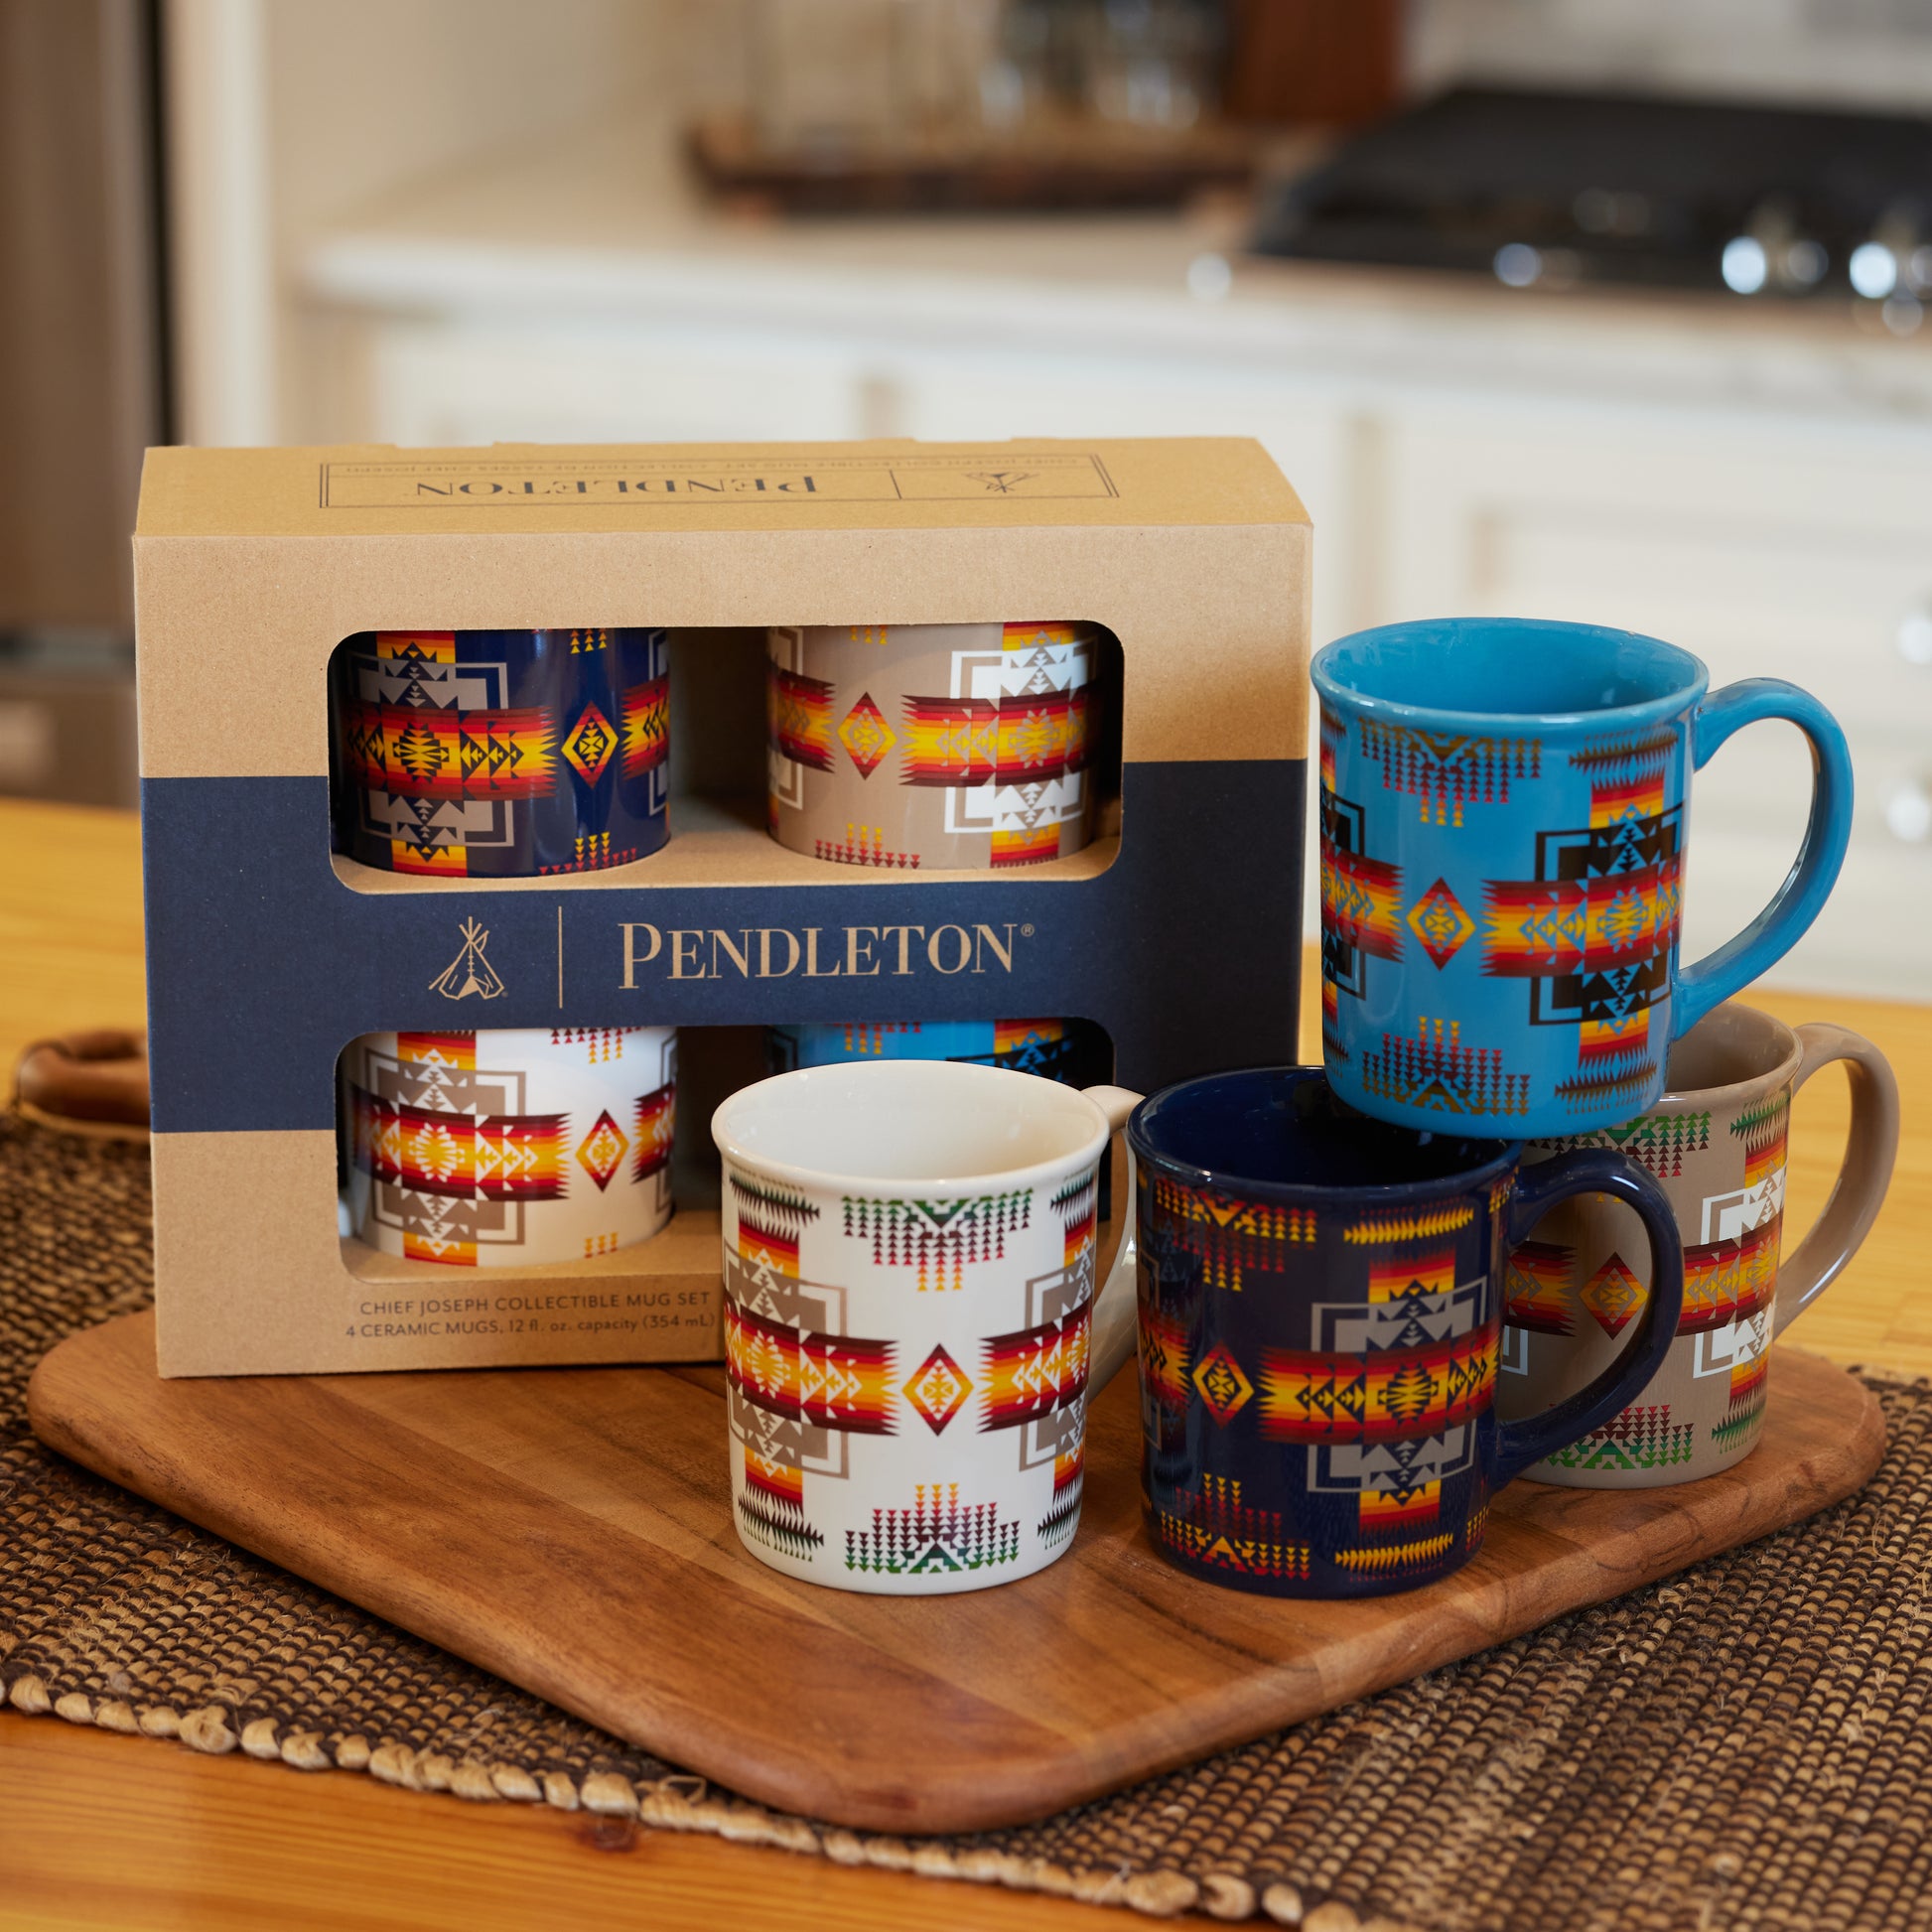 These Pendleton mugs have quickly become my daily favorites : r/muglife